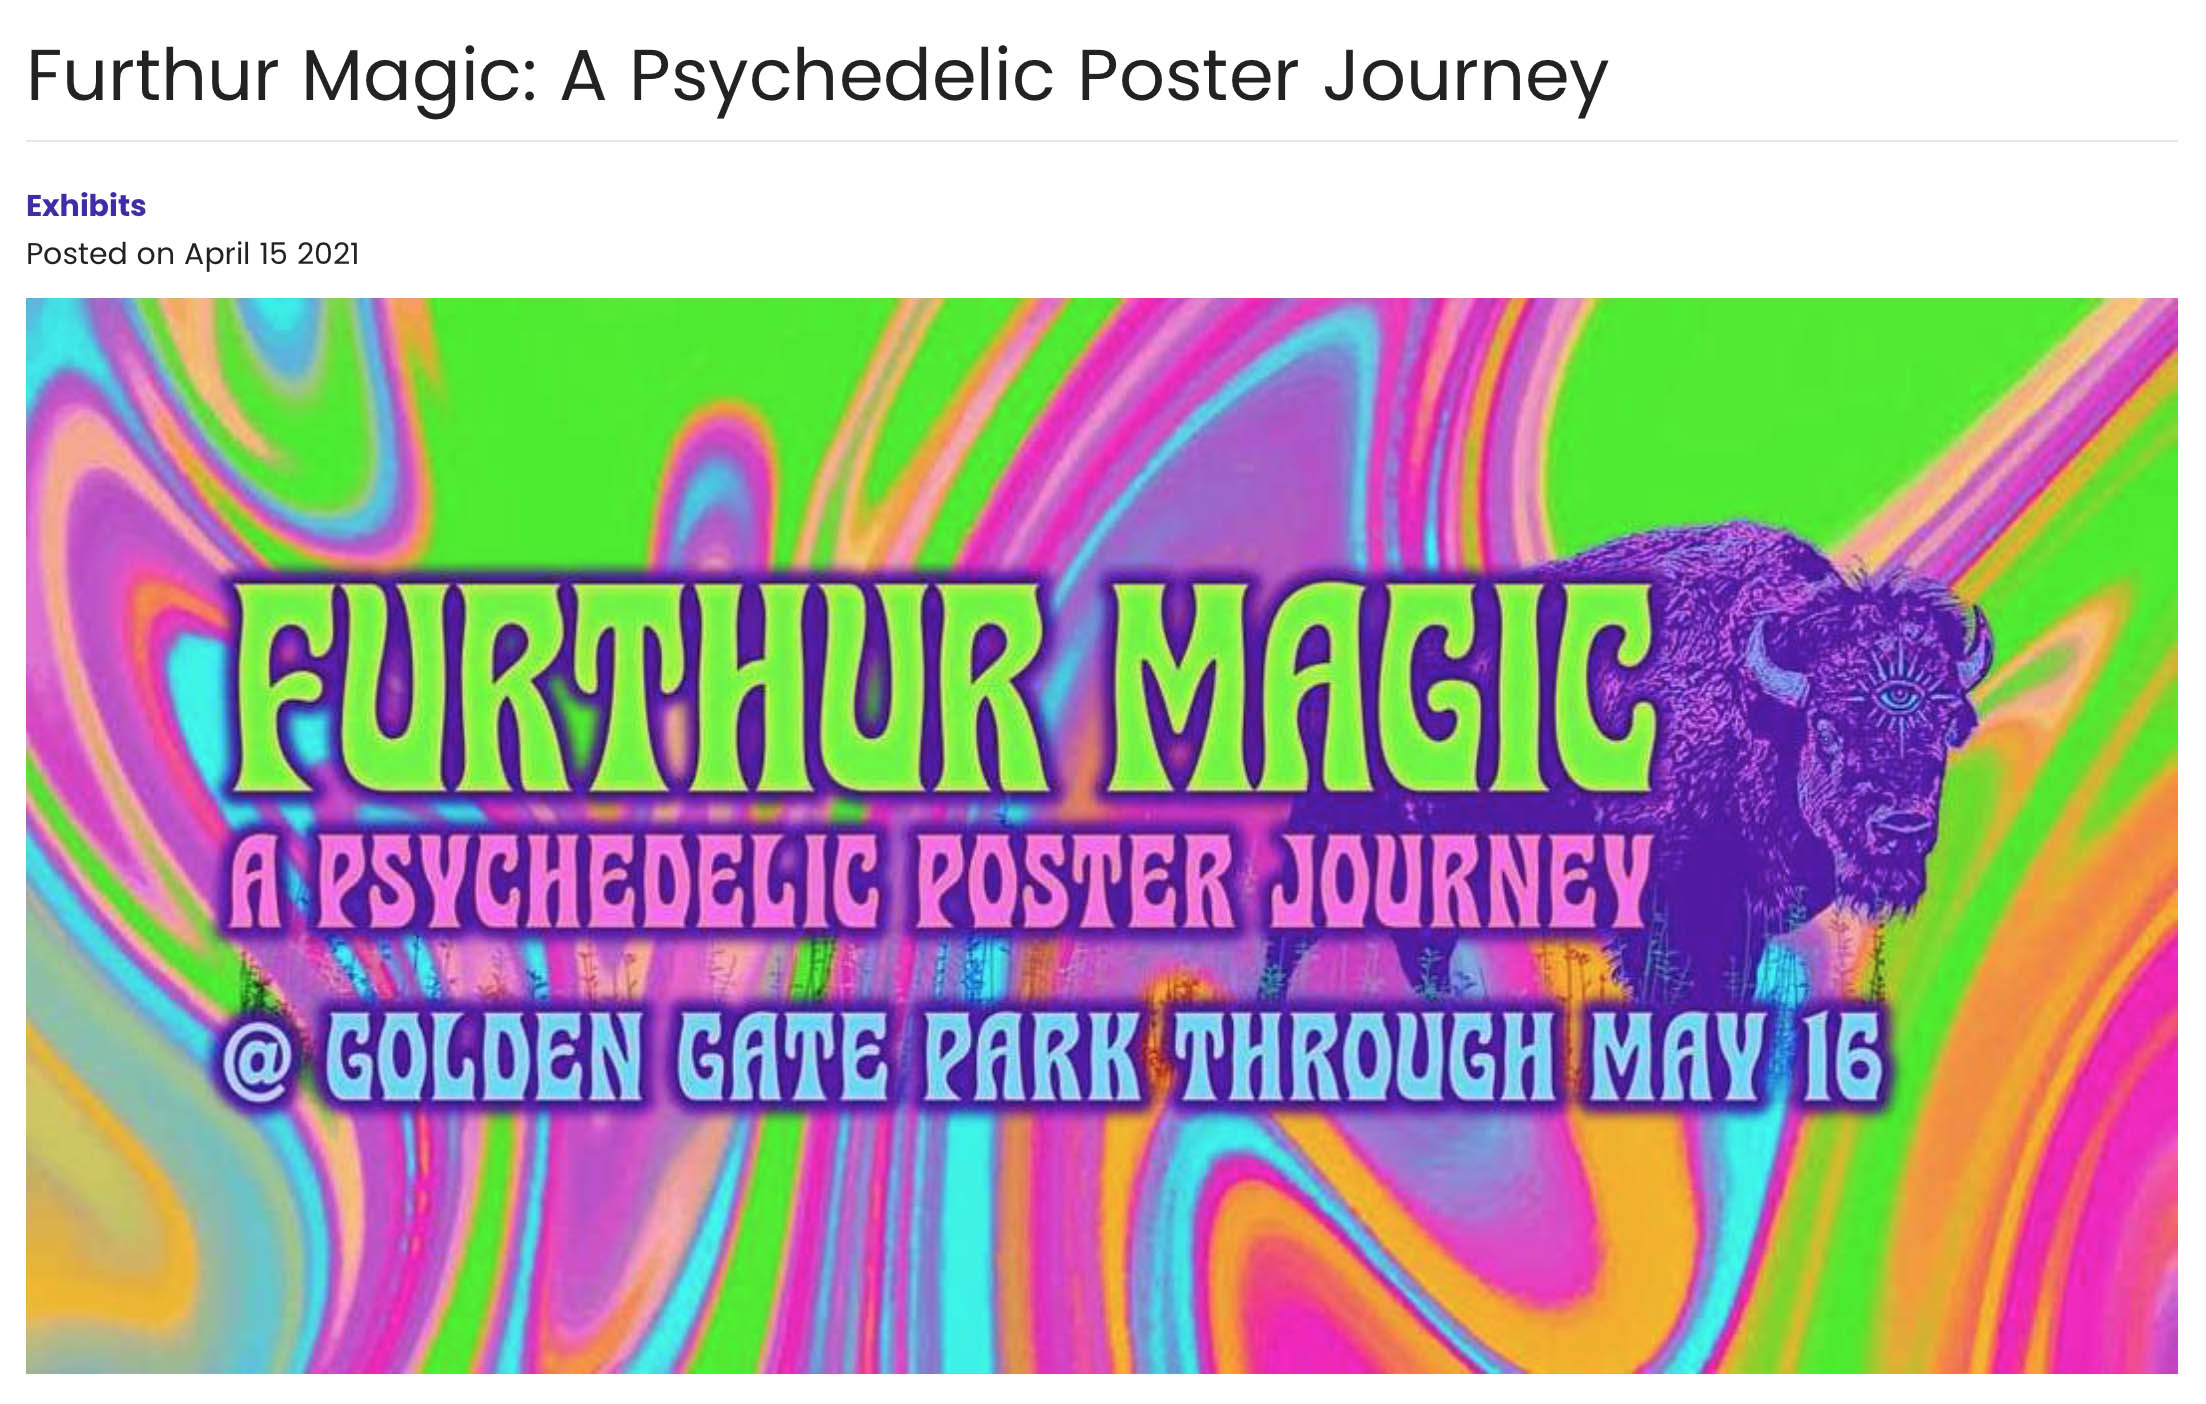 Furthur Magic: A Psychedelic Poster Journey, April and May 2021